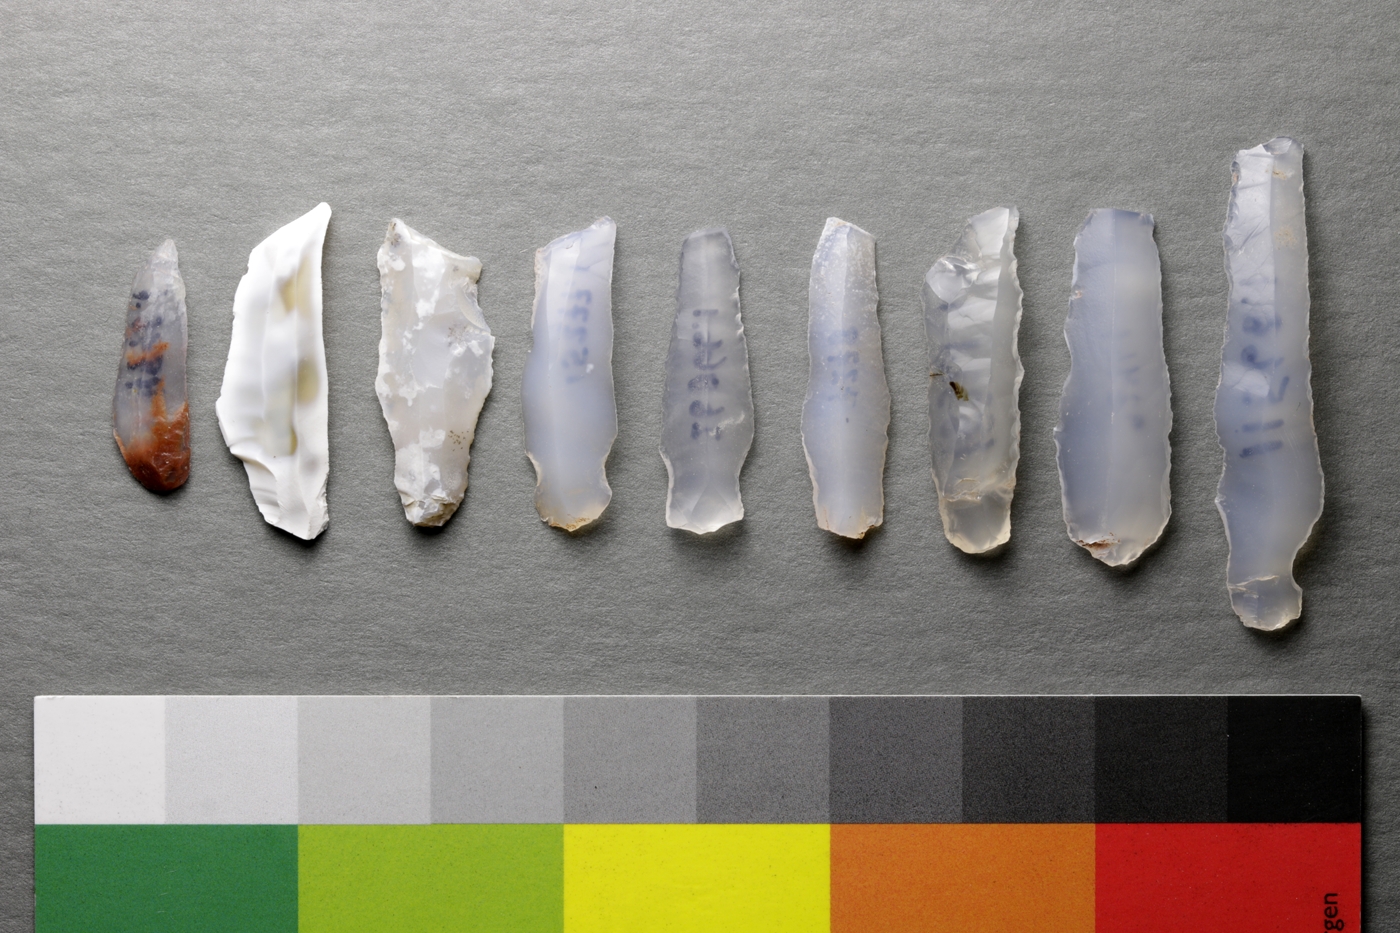 Tanged blades made by retouching a small area of the blade near the proximal end. All of these examples are made on chalcedony.